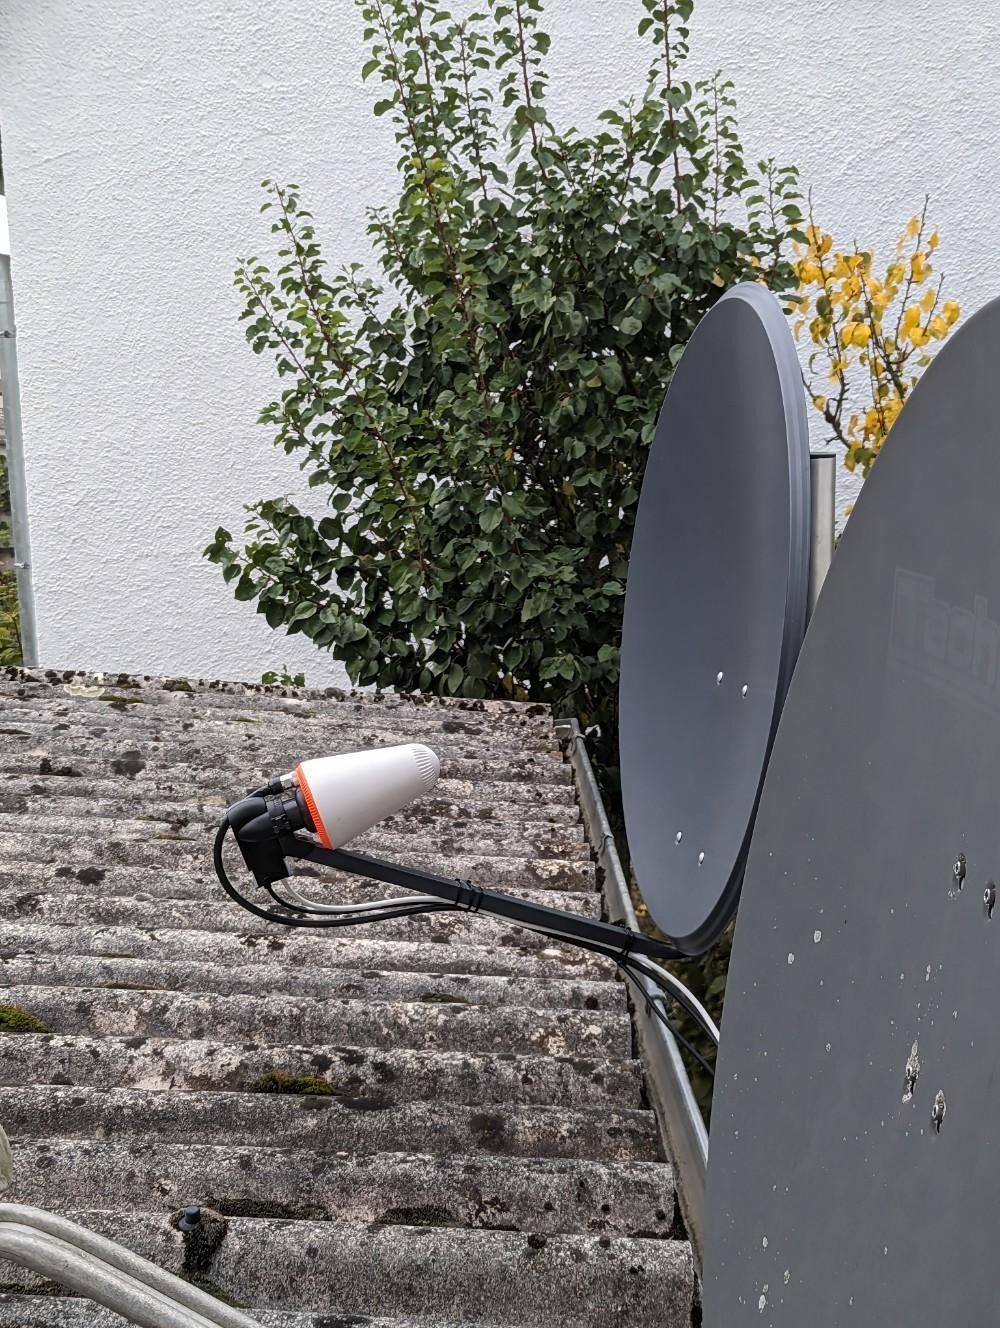 the SAT dish with the LNB and helix antenna